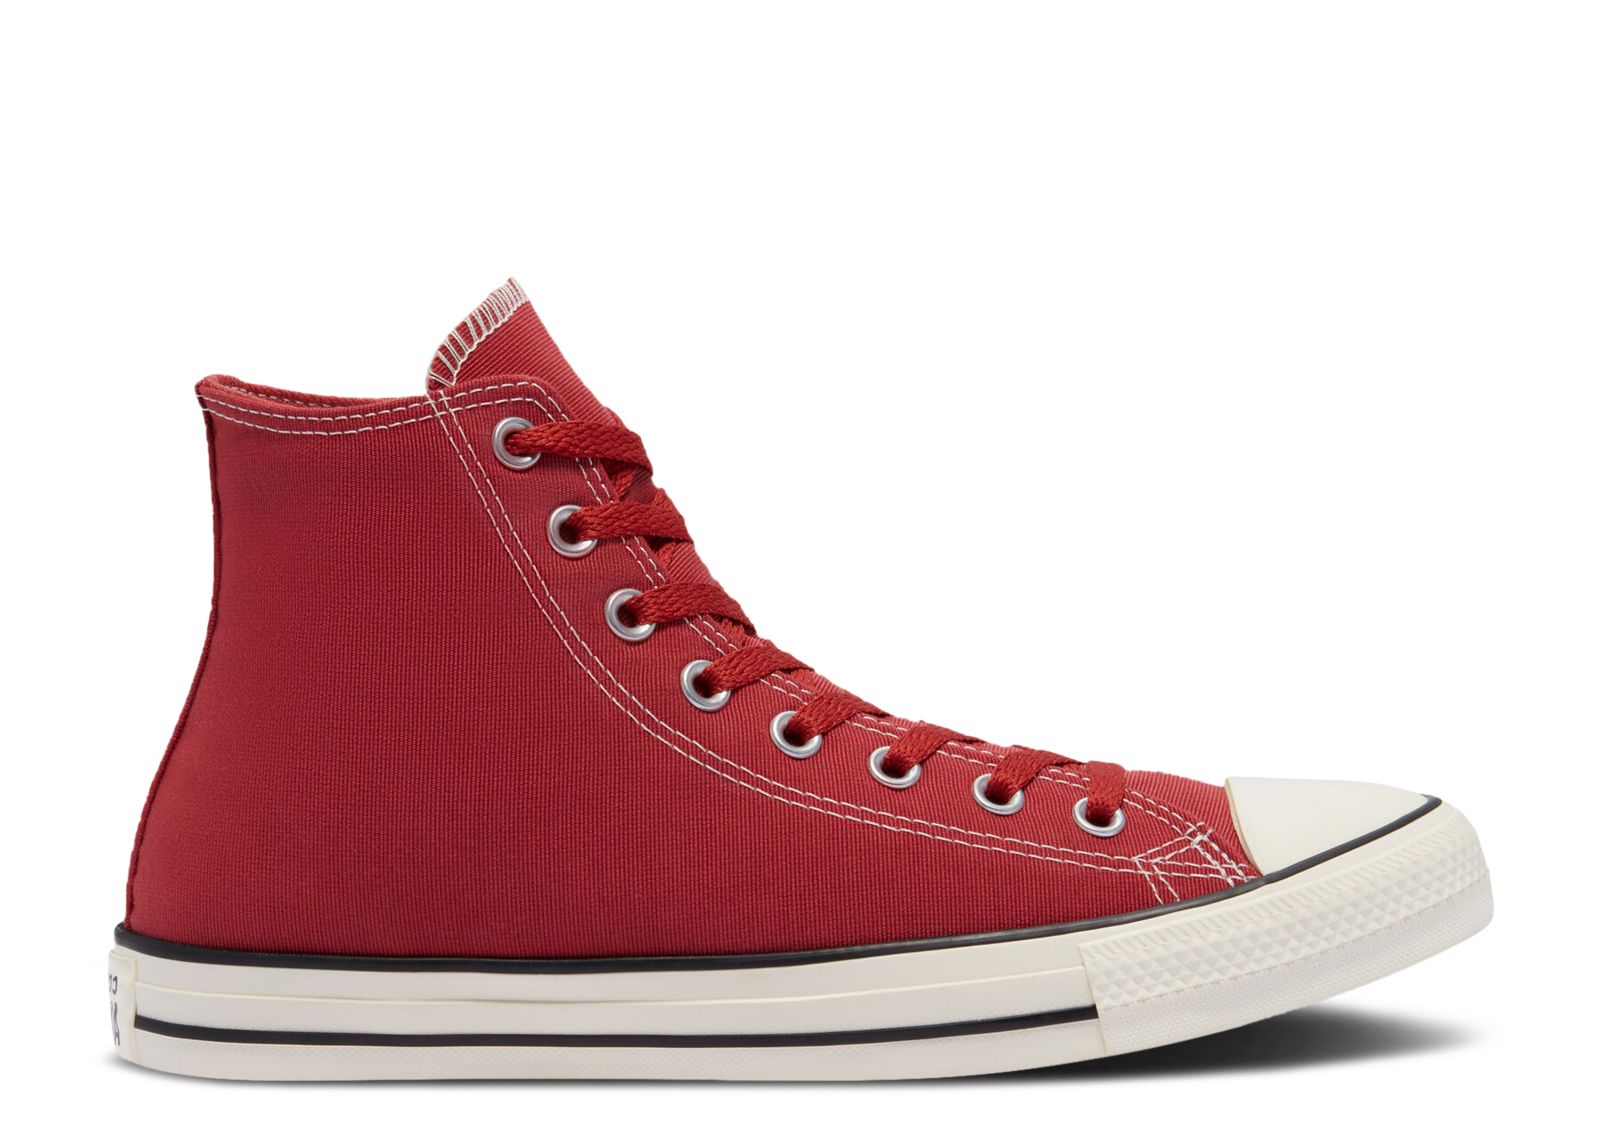 Кроссовки Converse Chuck Taylor All Star High 'The Great Outdoors - Claret Red', красный